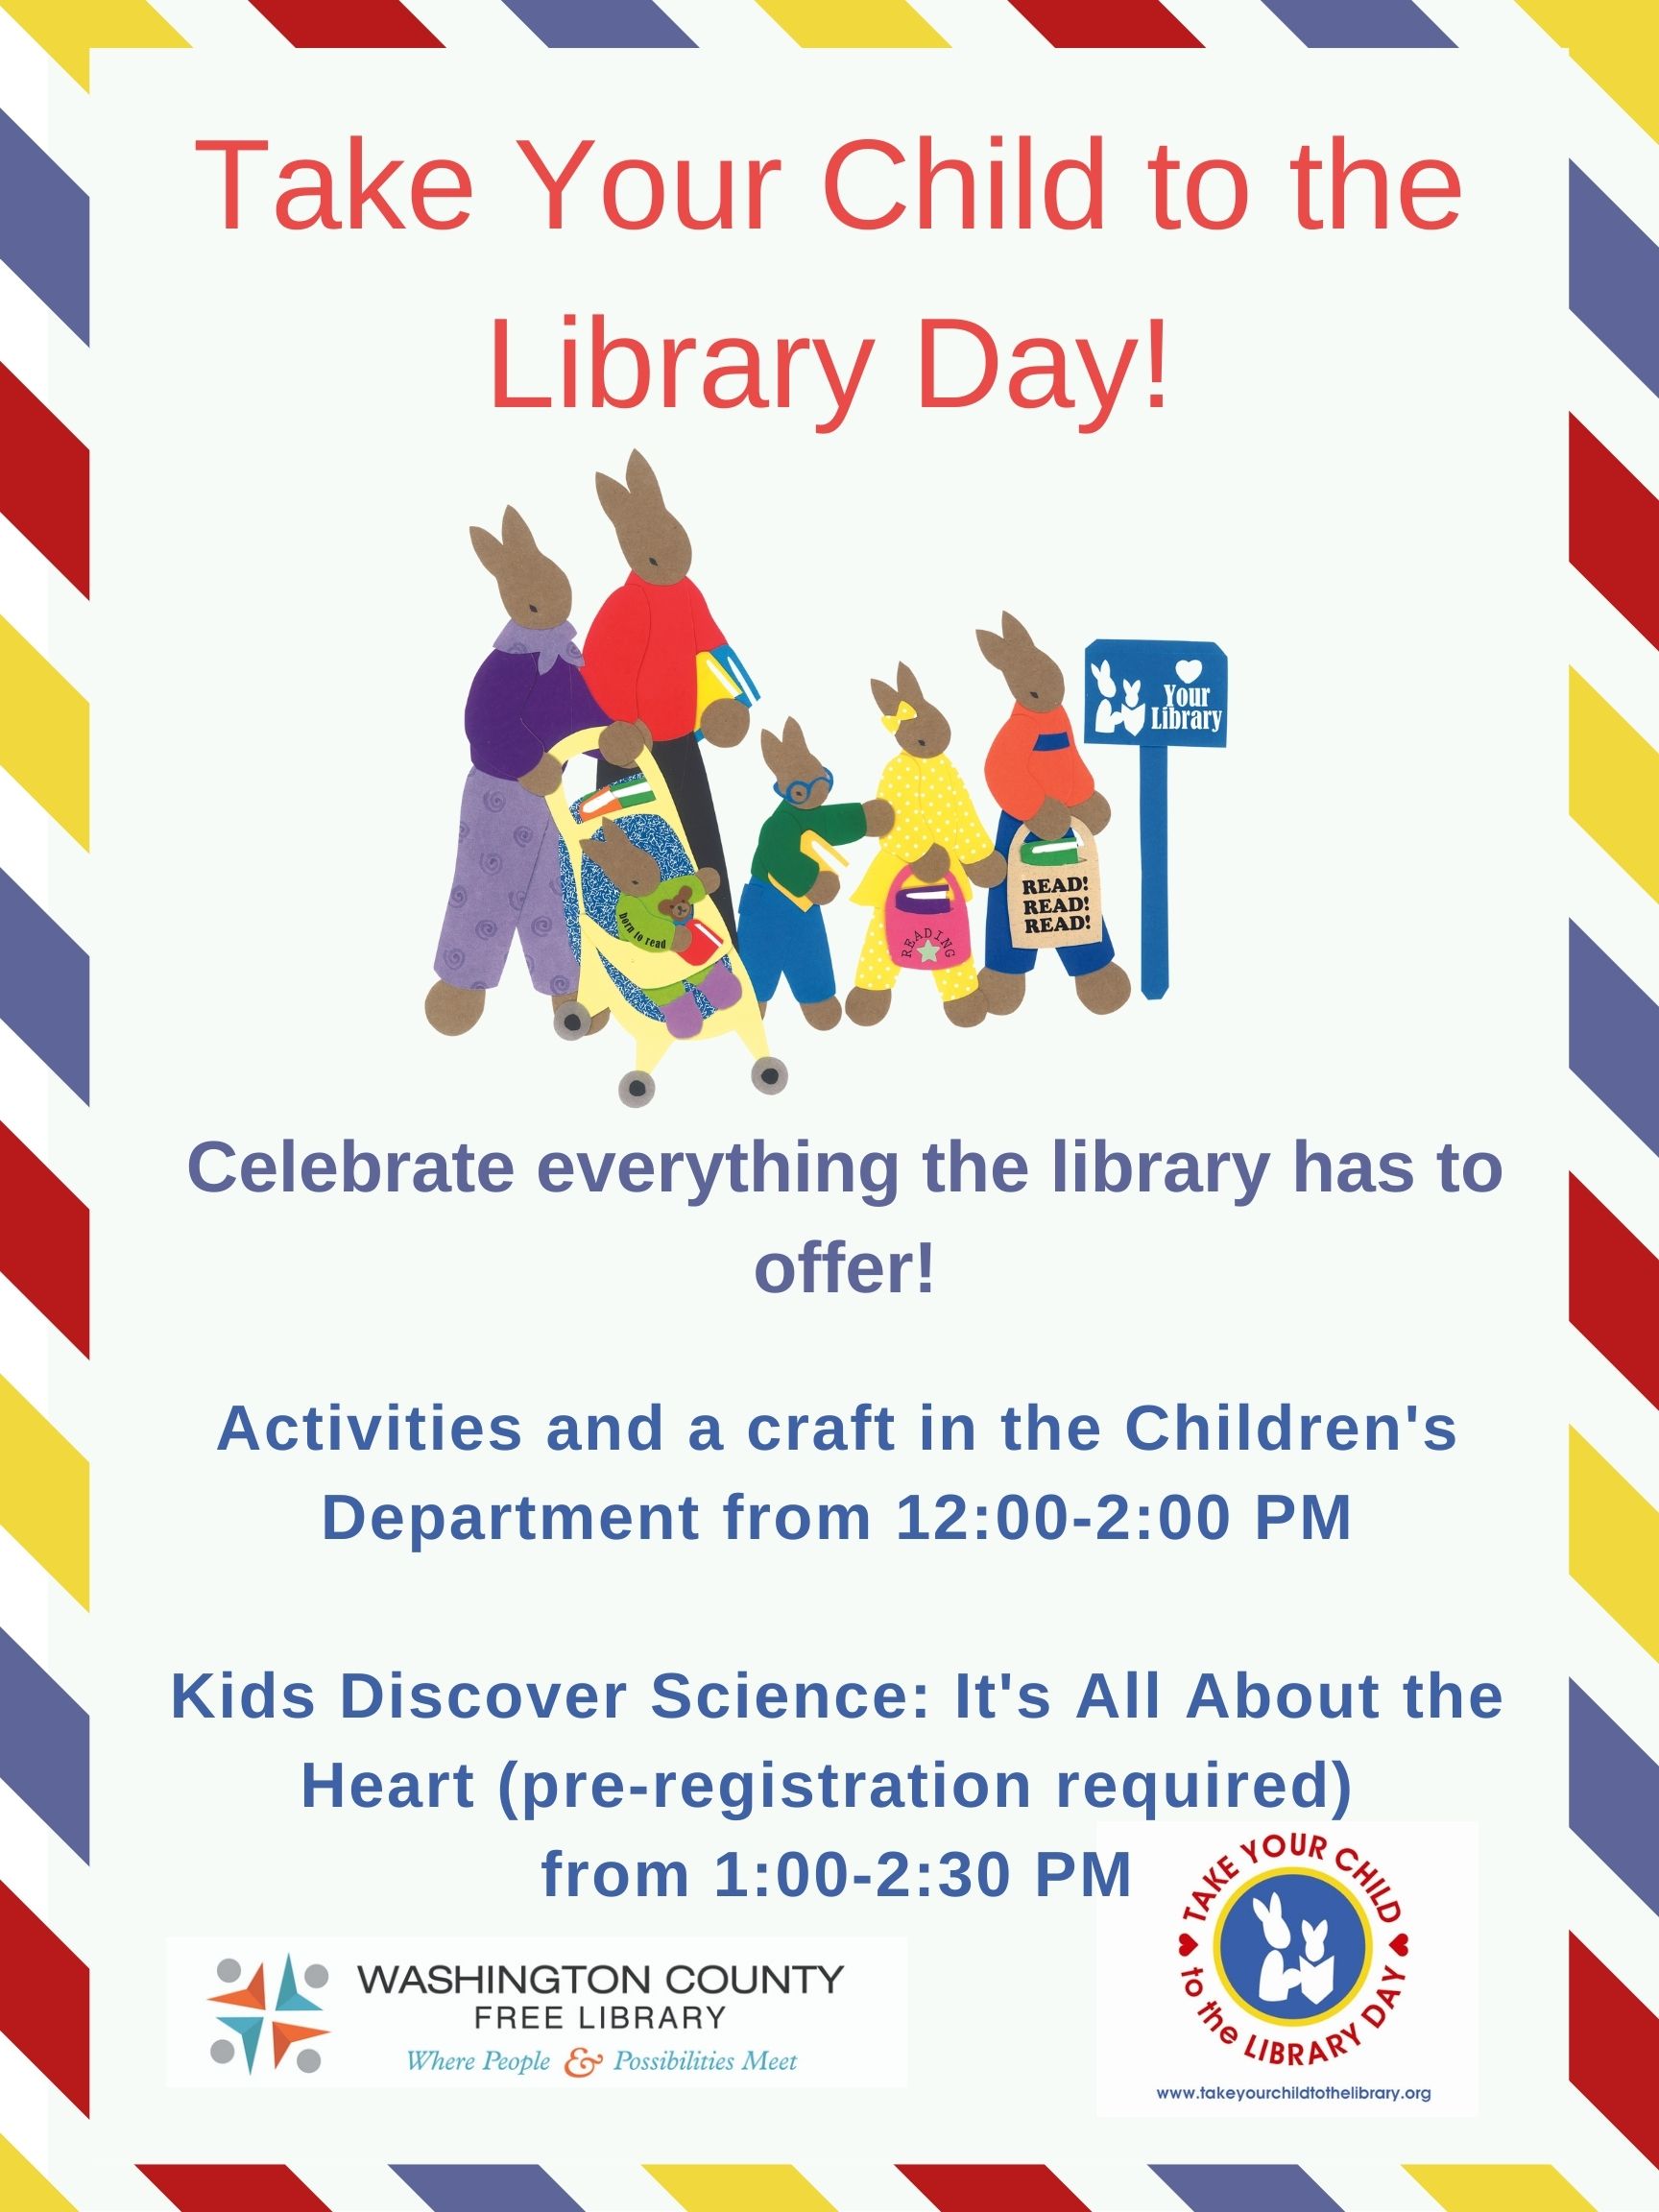 Poster describing Take Your Child to the Library Day